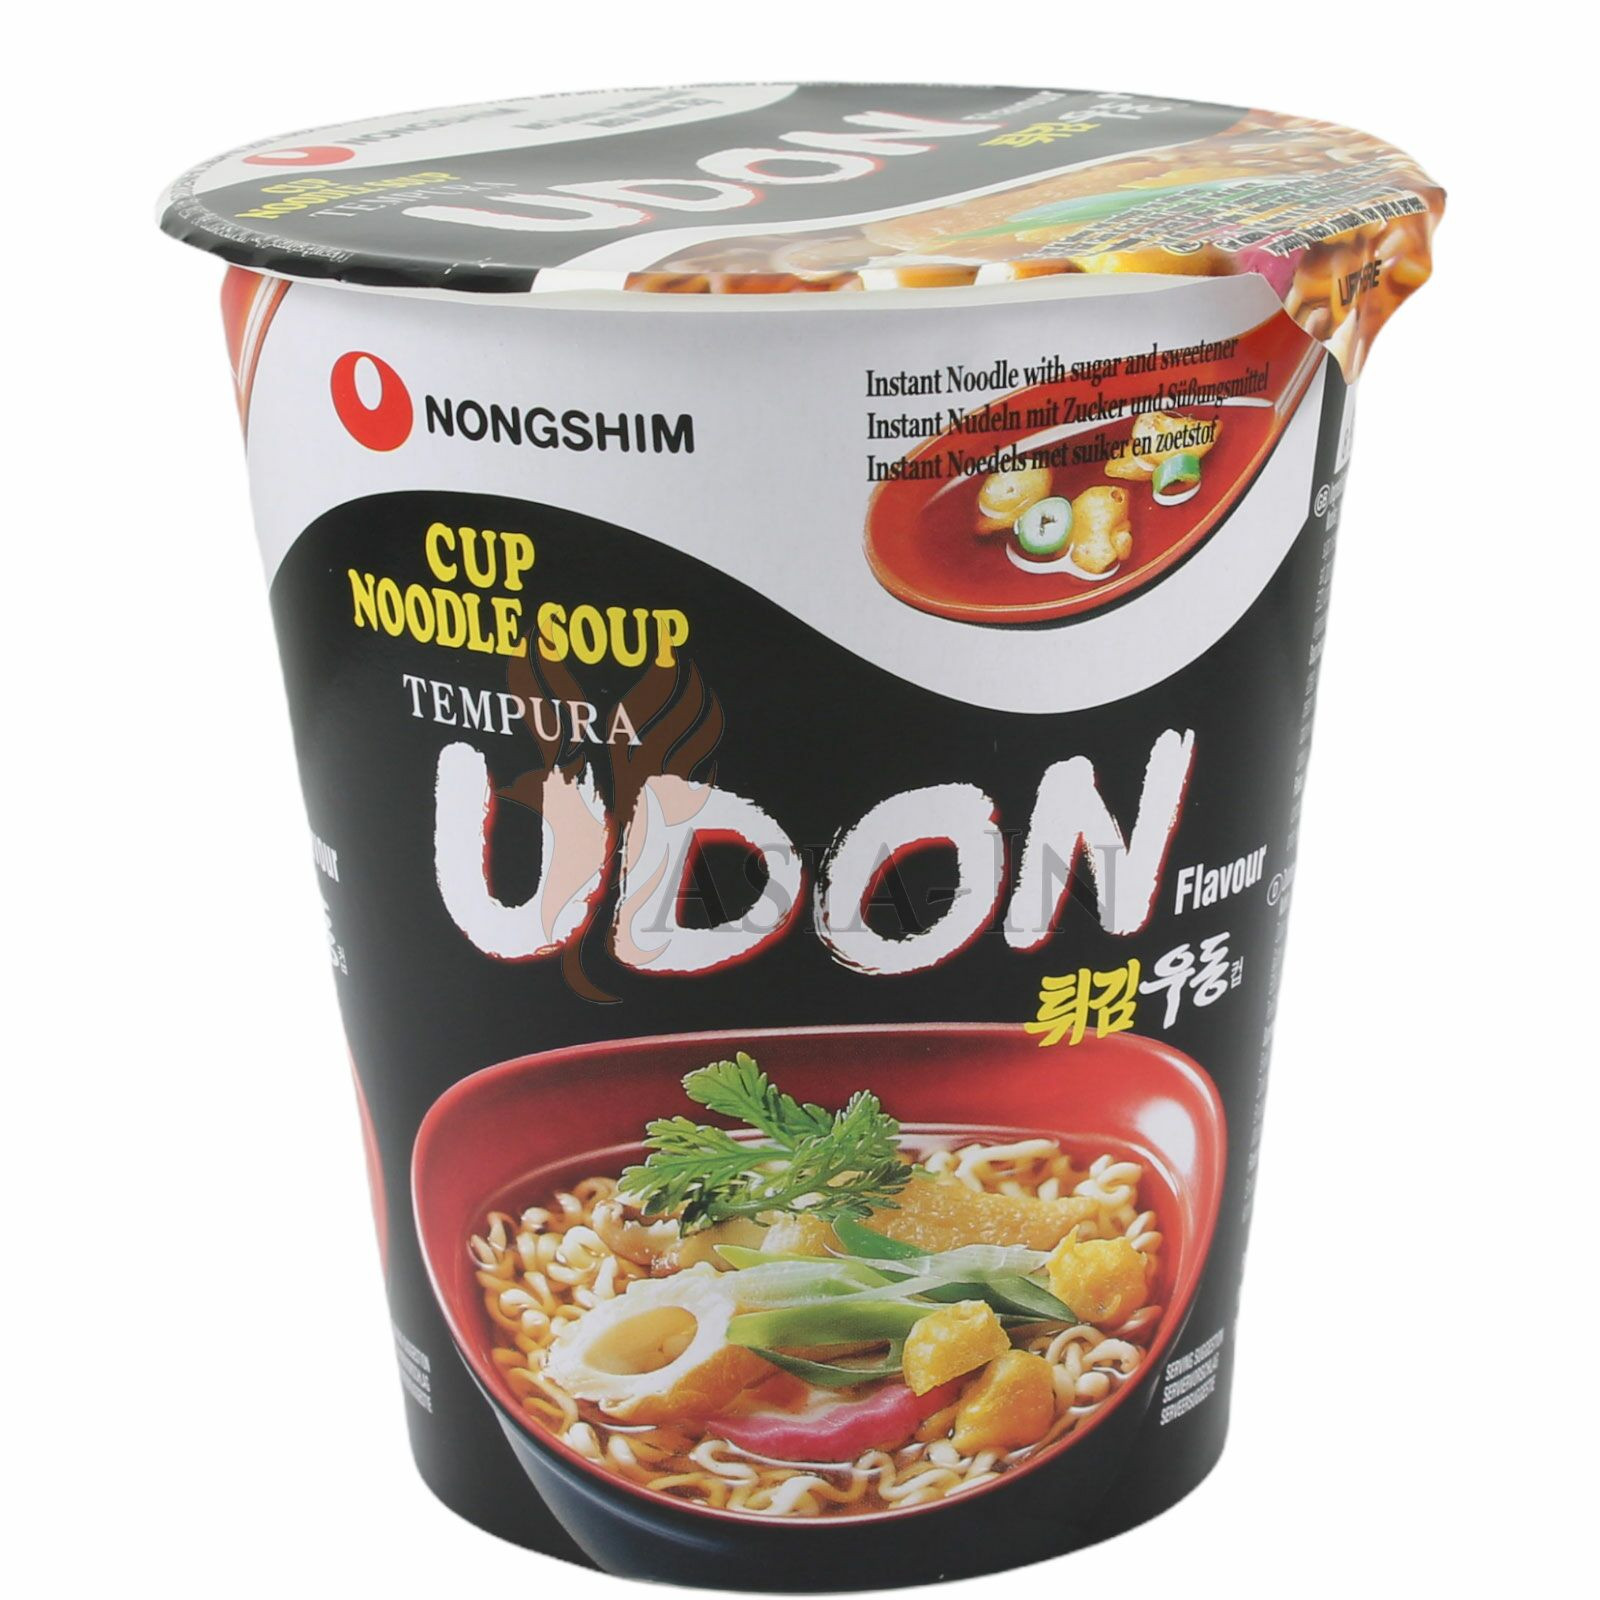 15 Instant Udon Noodles You Can Make In 5 Minutes